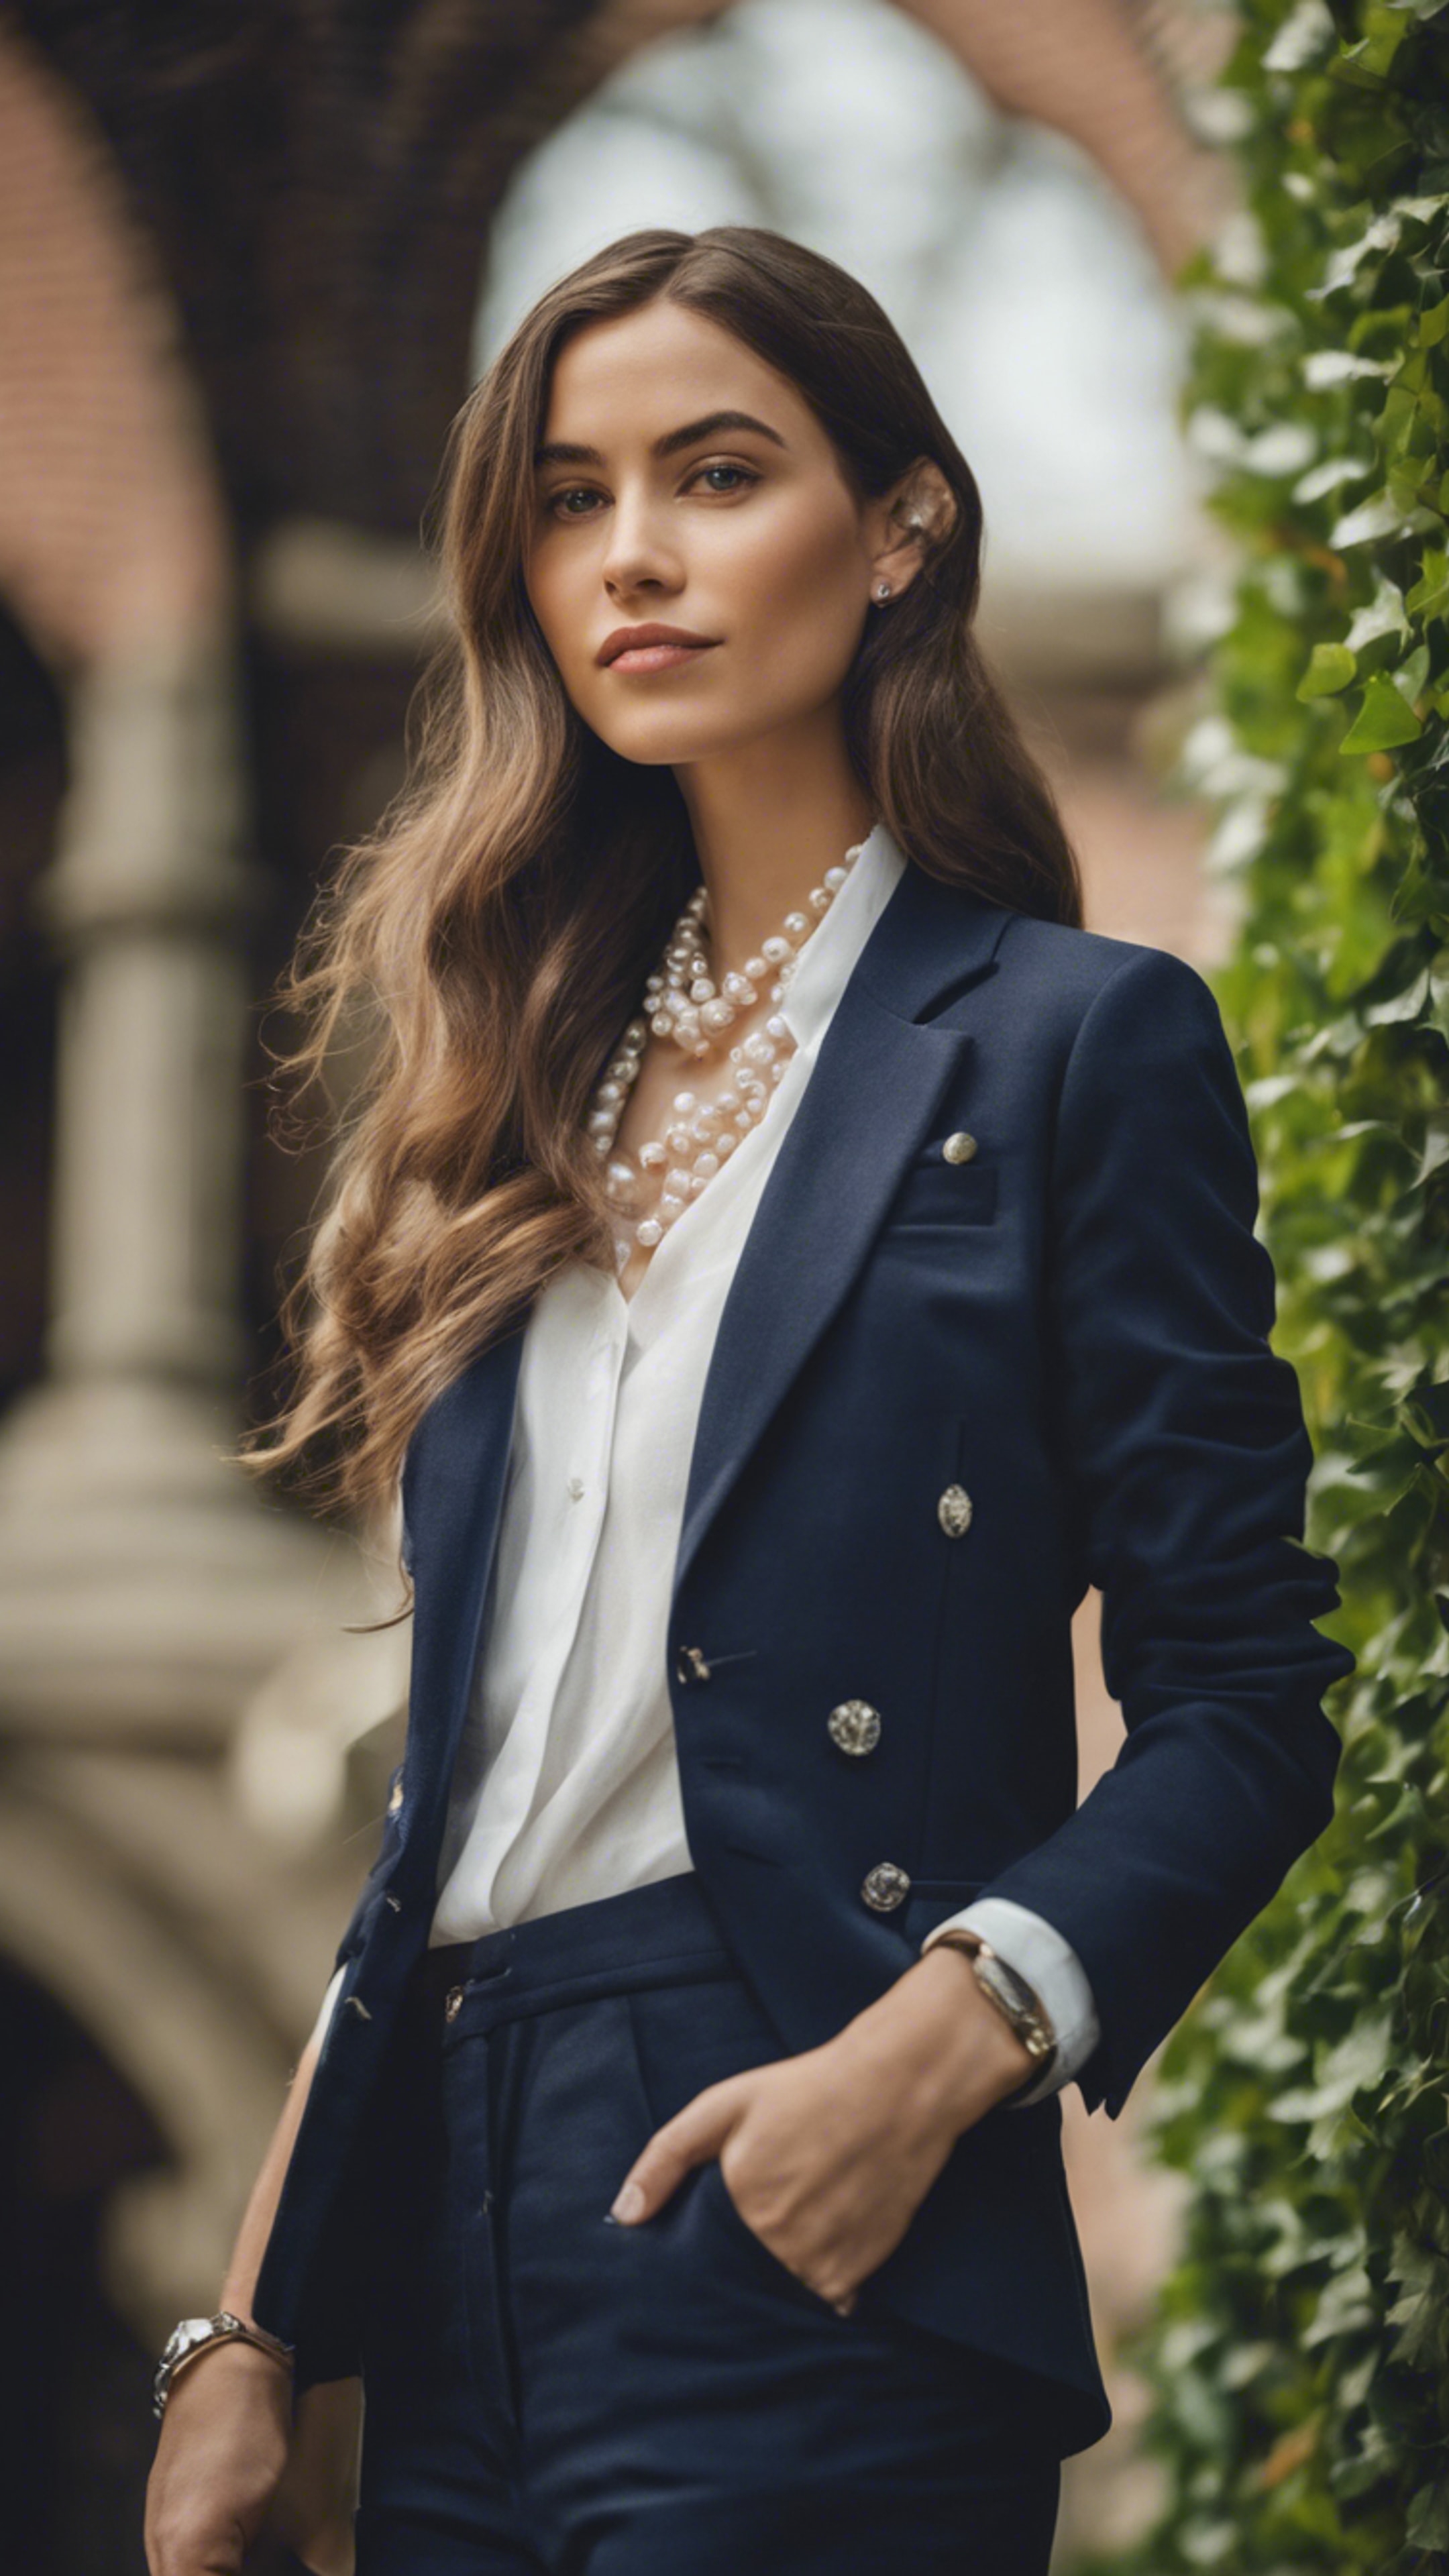 A portrait of a preppy woman in a navy blue blazer, pearl necklace, and a white linen shirt, posing in an Ivy League campus. Kertas dinding[1775f808339c45cb81cf]